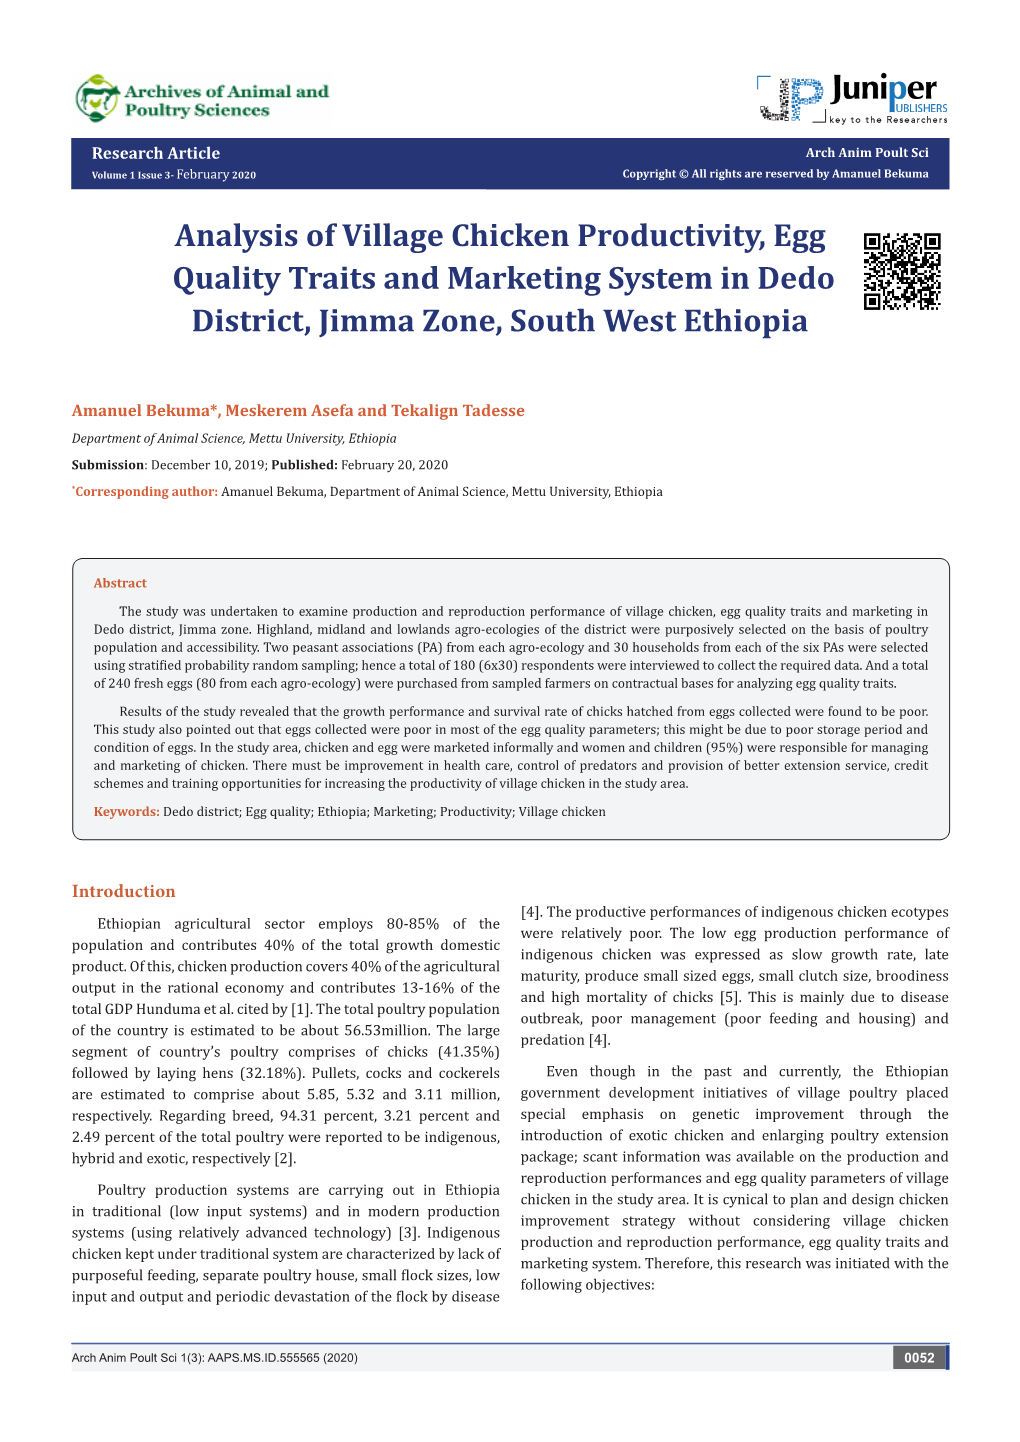 Analysis of Village Chicken Productivity, Egg Quality Traits and Marketing System in Dedo District, Jimma Zone, South West Ethiopia